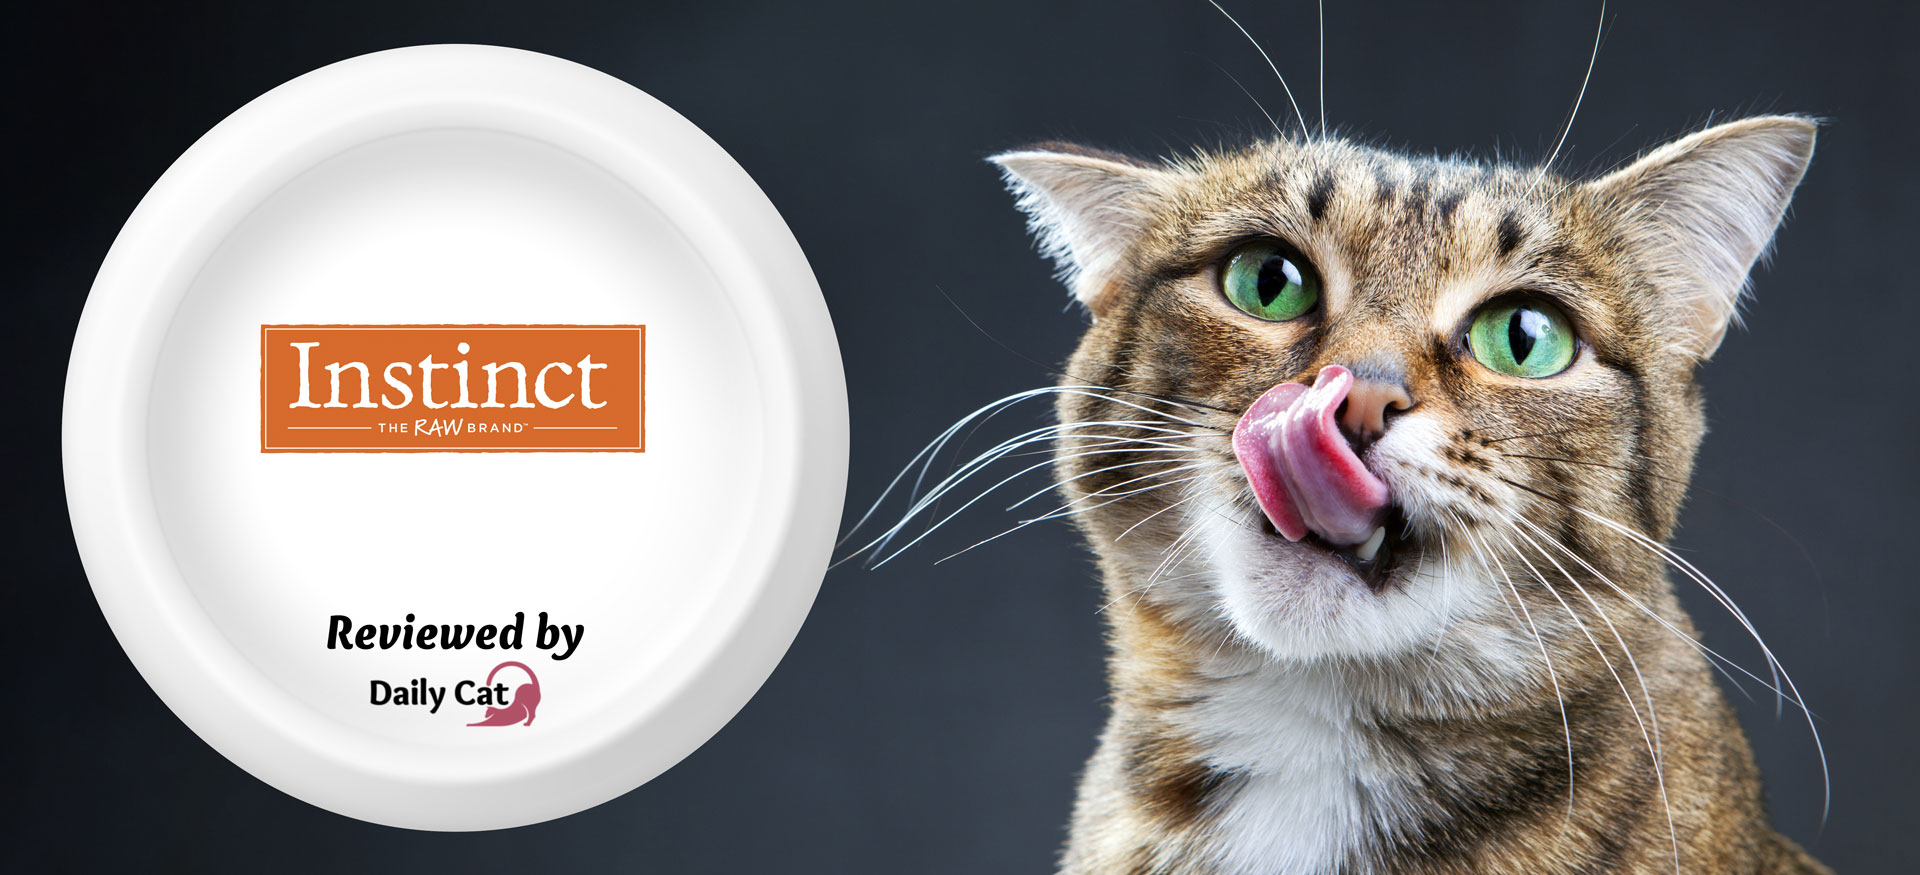 The Daily Cat-brand- Instinct Cat Food Review Graphic